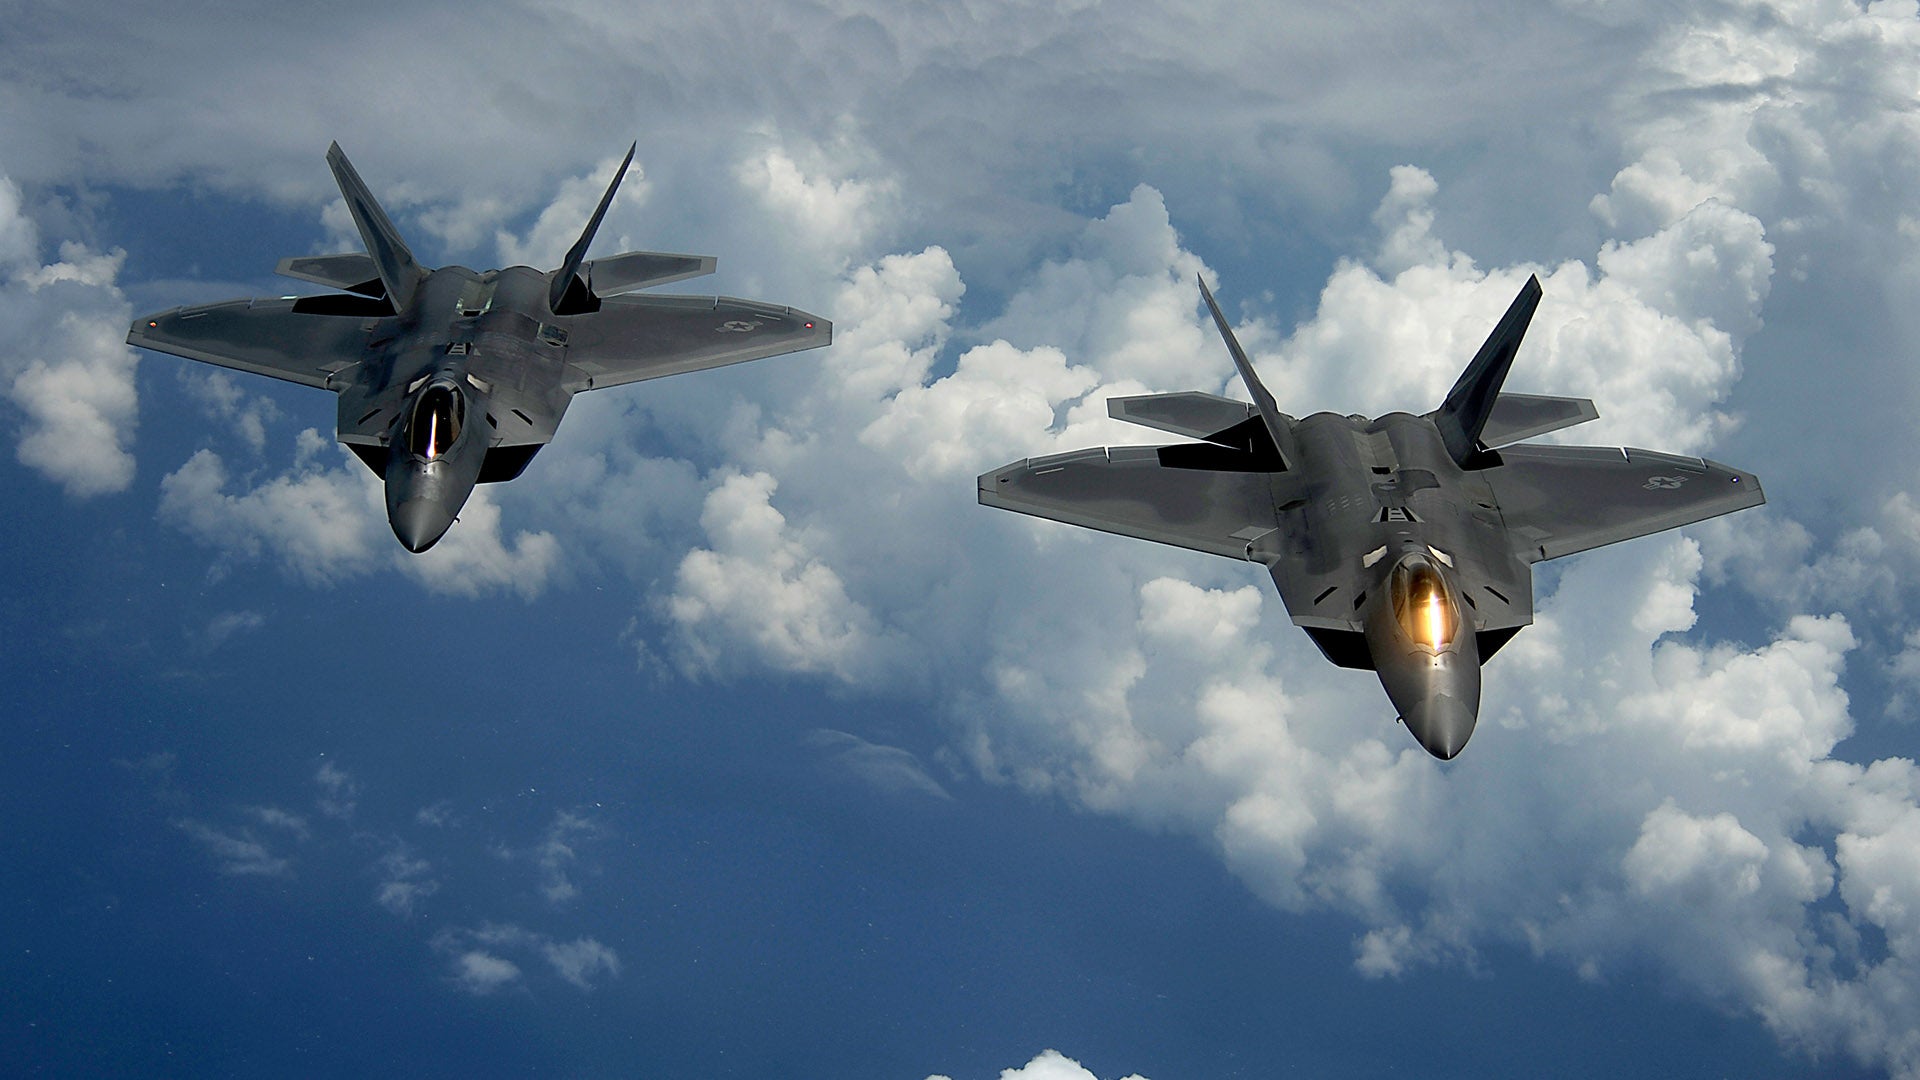 A pair of 1st Fighter Wing's F-22 Raptors from Joint Base Langley-Eustis, Va., pulls away and flies behind a KC-135 Stratotanker with the 756th Air Refueling Squadron, Joint Base Andrews Naval Air Facility, Md. after receiving fuel off the east coast on July 10, 2012. The first Raptor assigned to the Wing arrived Jan. 7, 2005. This aircraft was allocated as a trainer, and was docked in a hanger for maintenance personnel to familiarize themselves with its complex systems. The second Raptor, designated for flying operations, arrived Jan. 18, 2005. On Dec. 15, 2005, Air Combat Command commander, along with the 1st FW commander, announced the 27th Fighter Squadron as fully operational capable to fly, fight and win with the F-22.